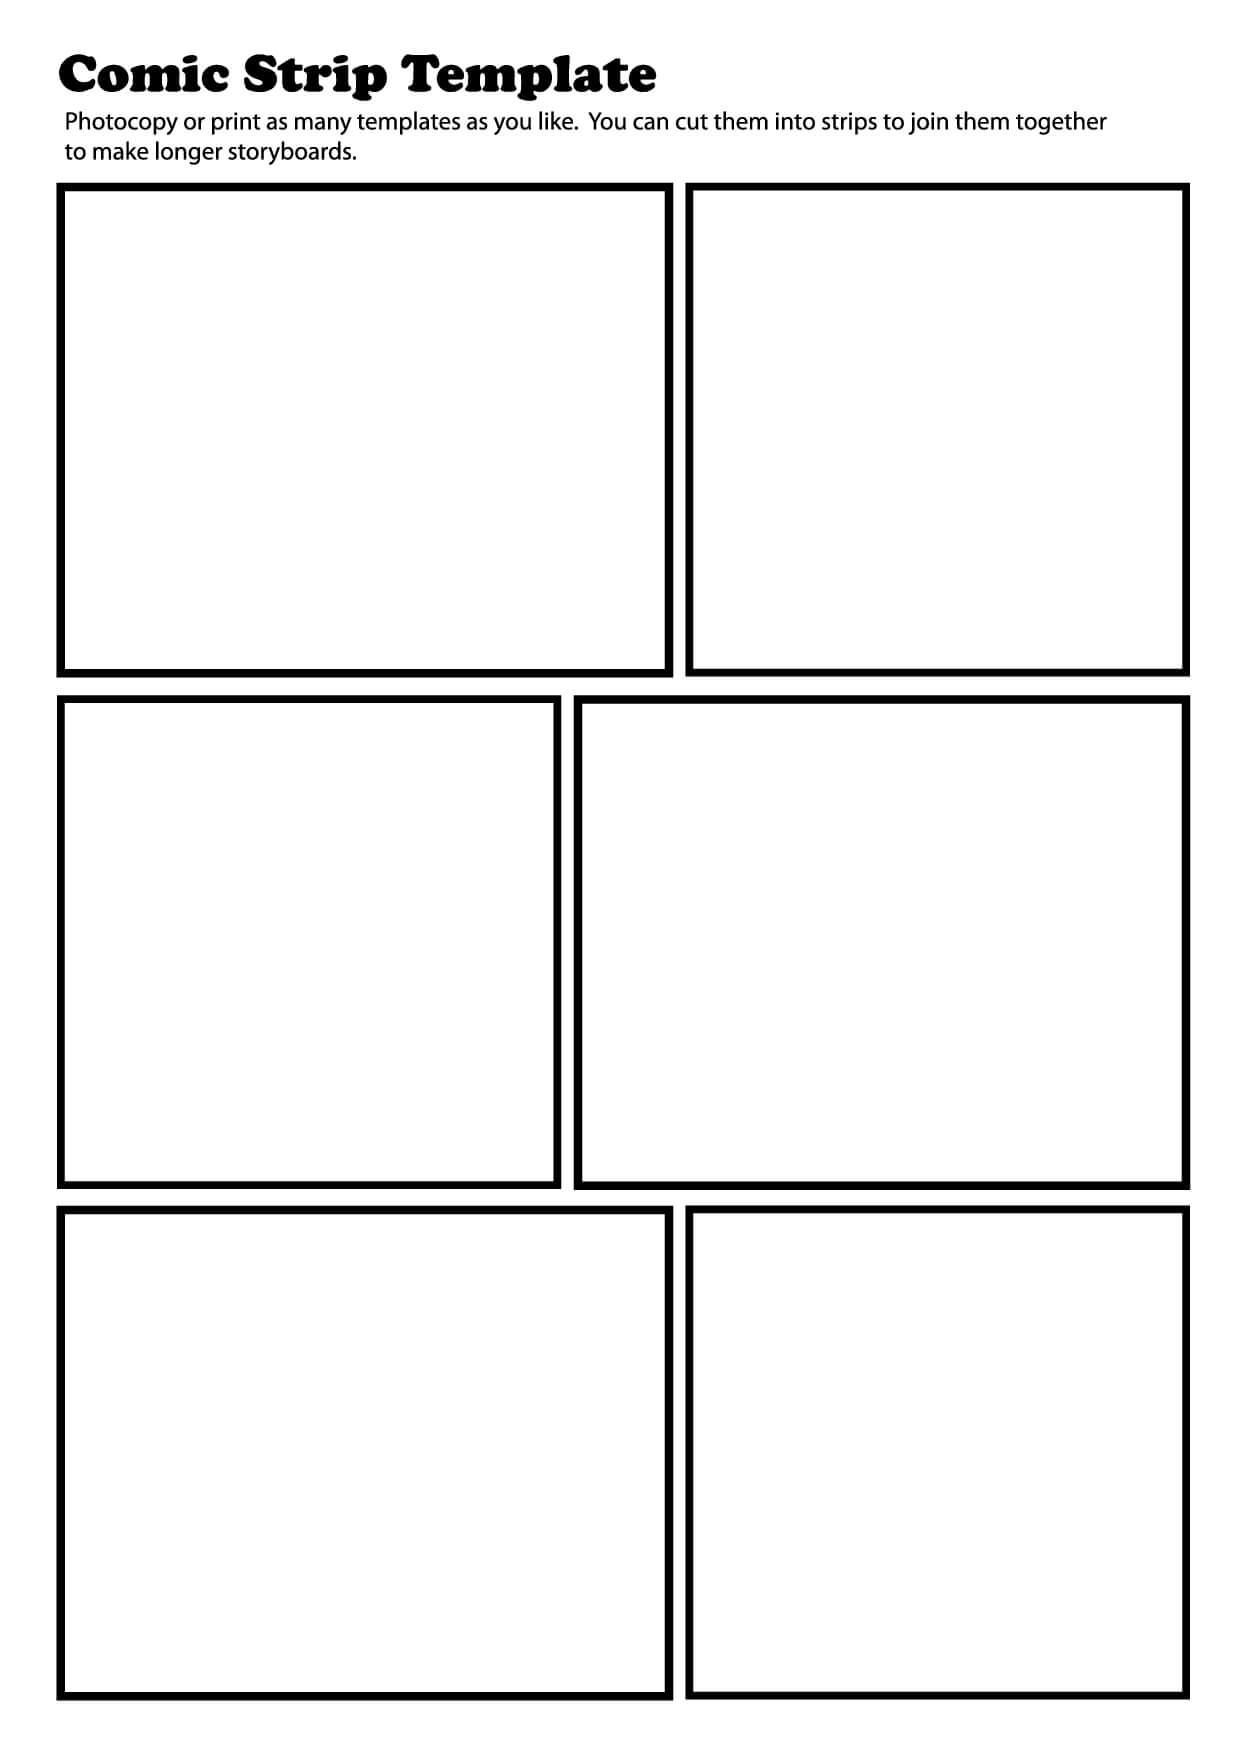 Comic Strip Template (Pdf) | Comic Strip Template, Comic For Blank Four Square Writing Template